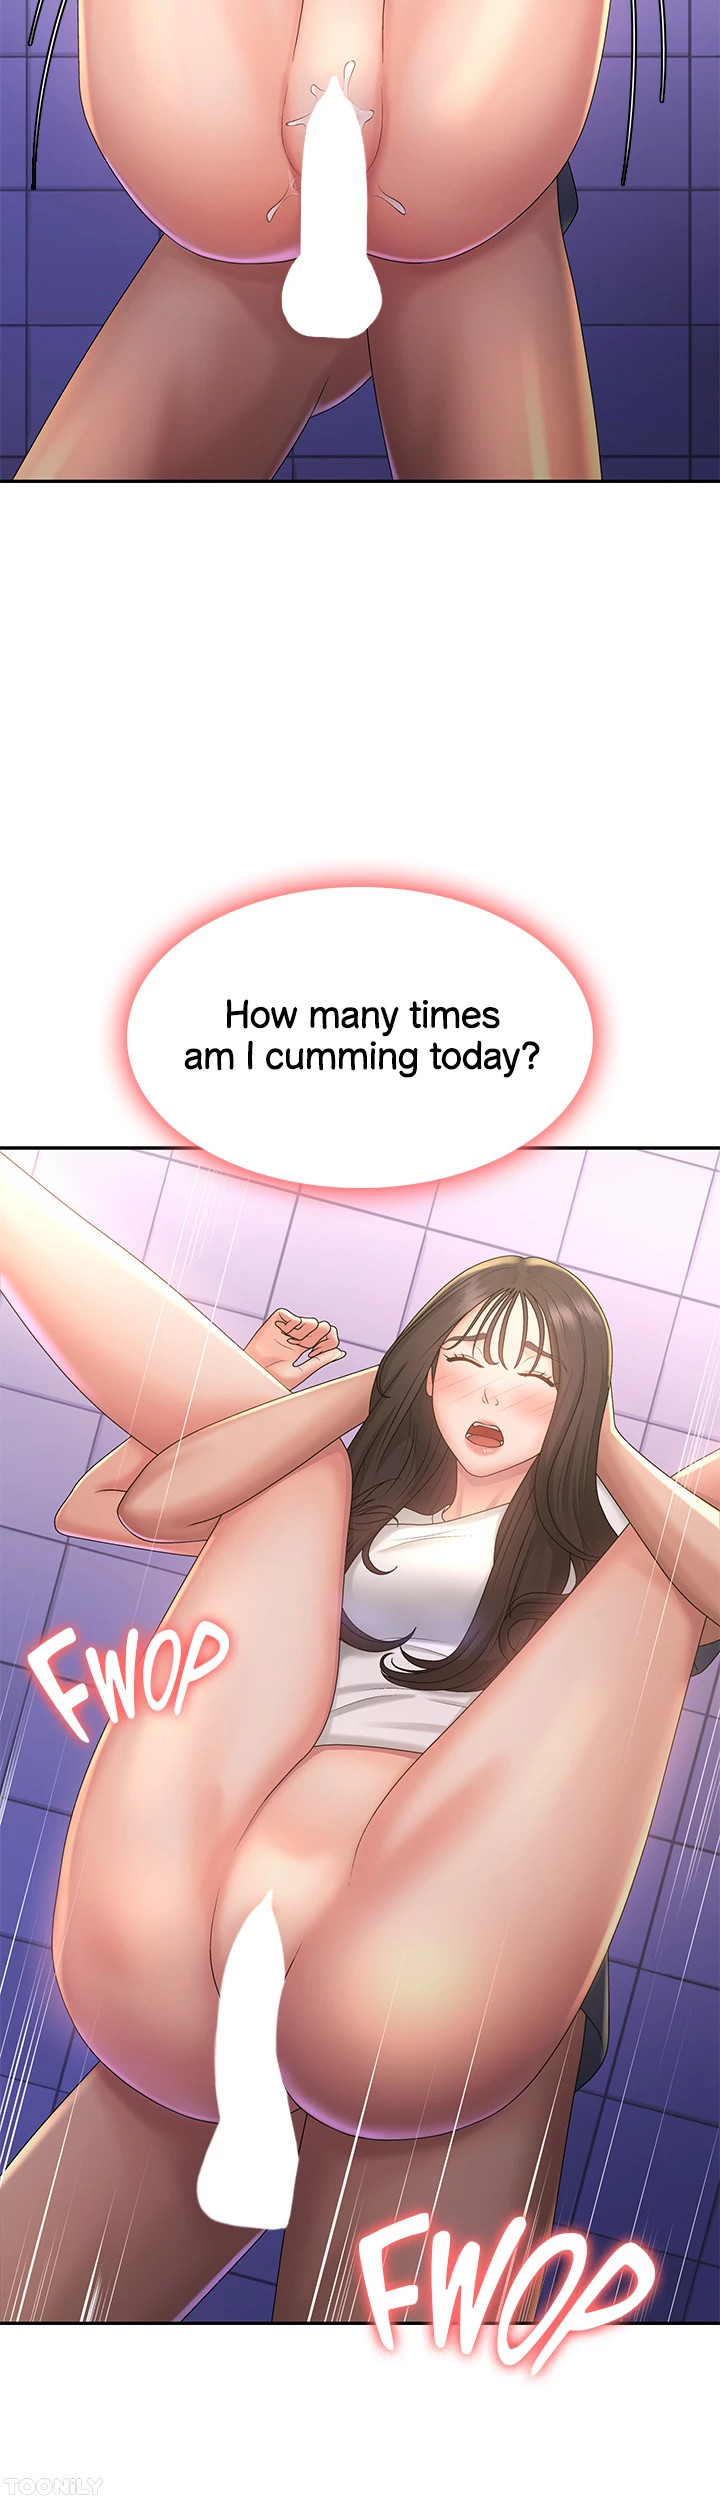 My Aunt in Puberty Chapter 39 - HolyManga.net